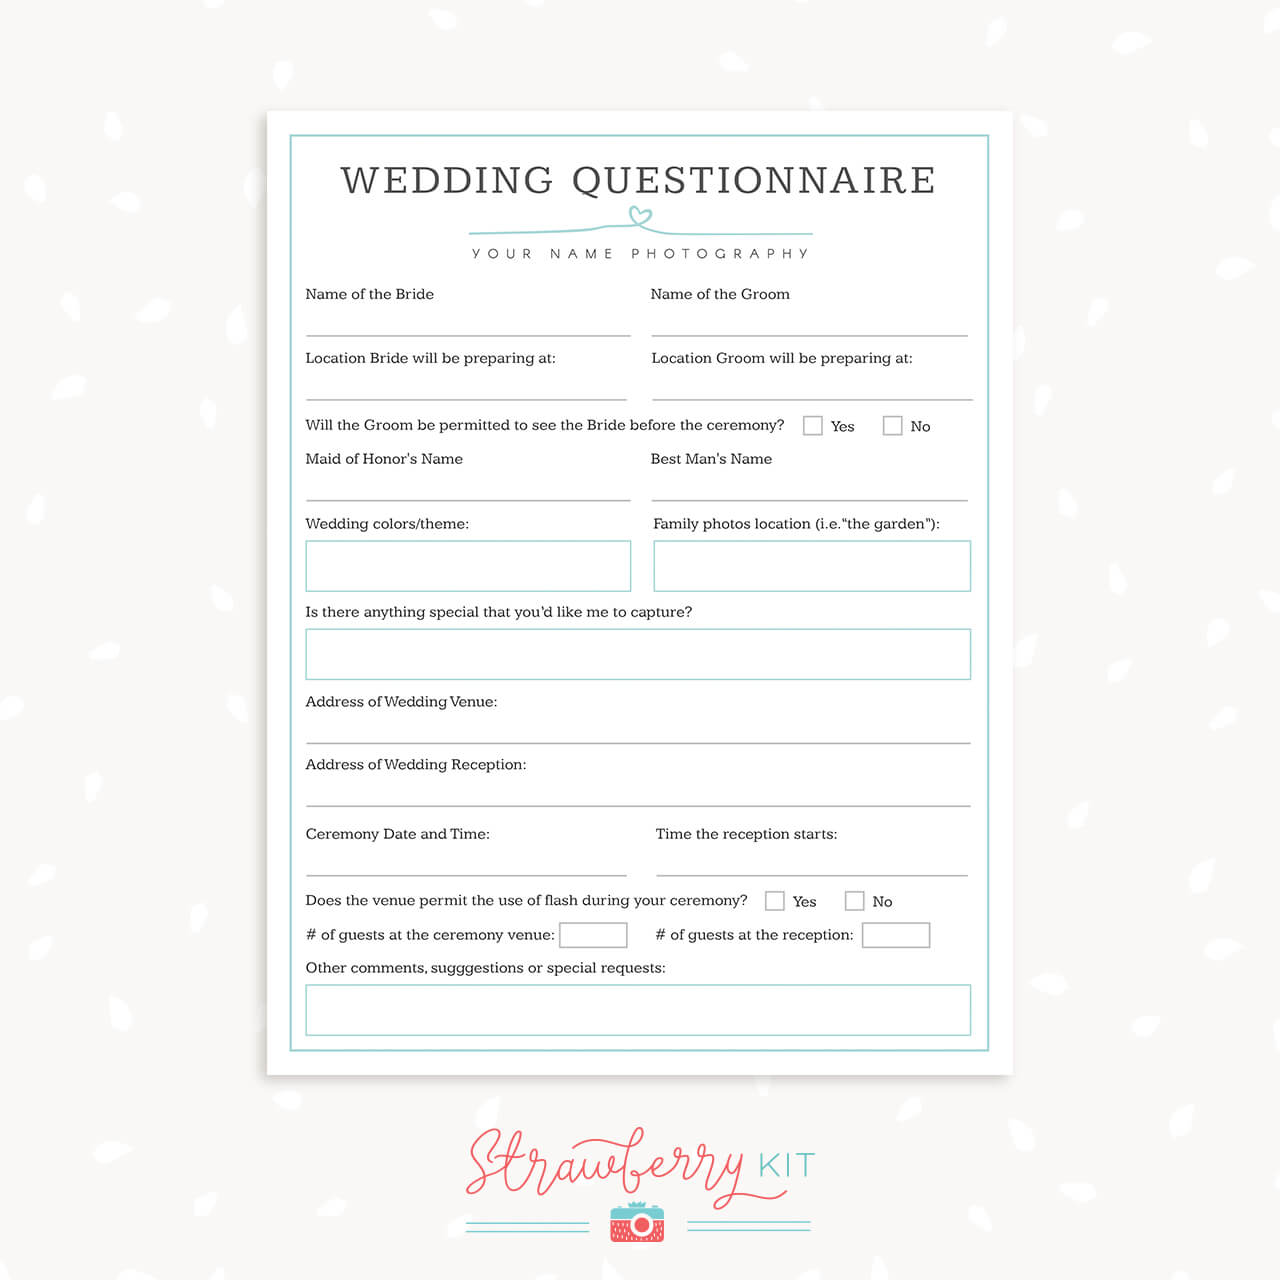 Wedding photography questionnaire template - Strawberry Kit